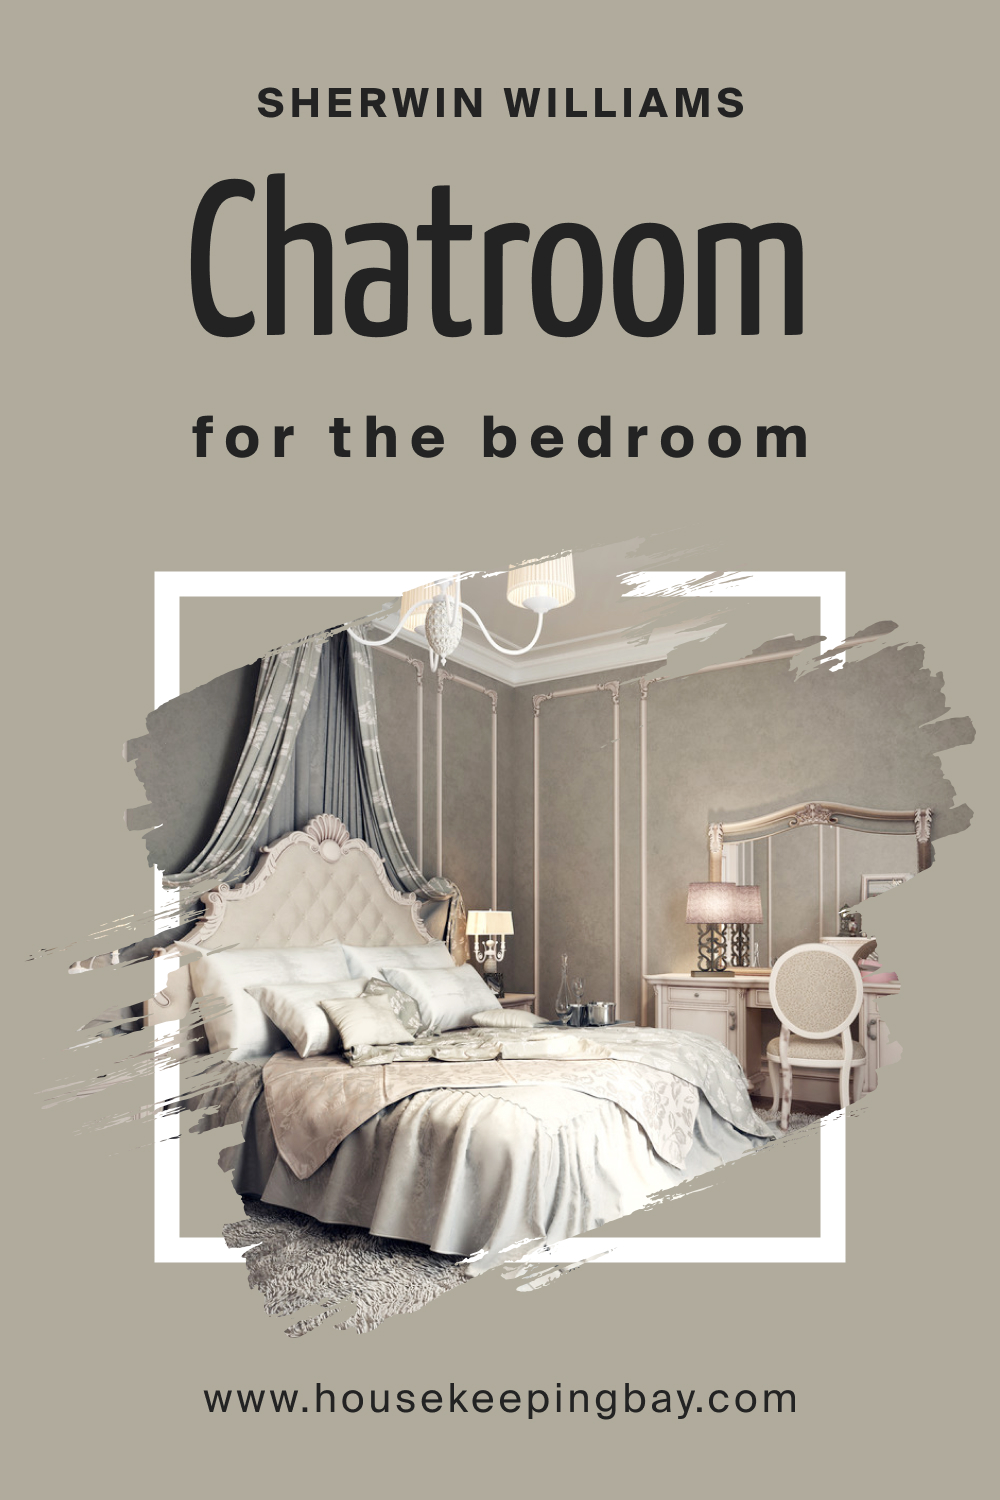 Sherwin Williams. SW 6171 Chatroom For the bedroom